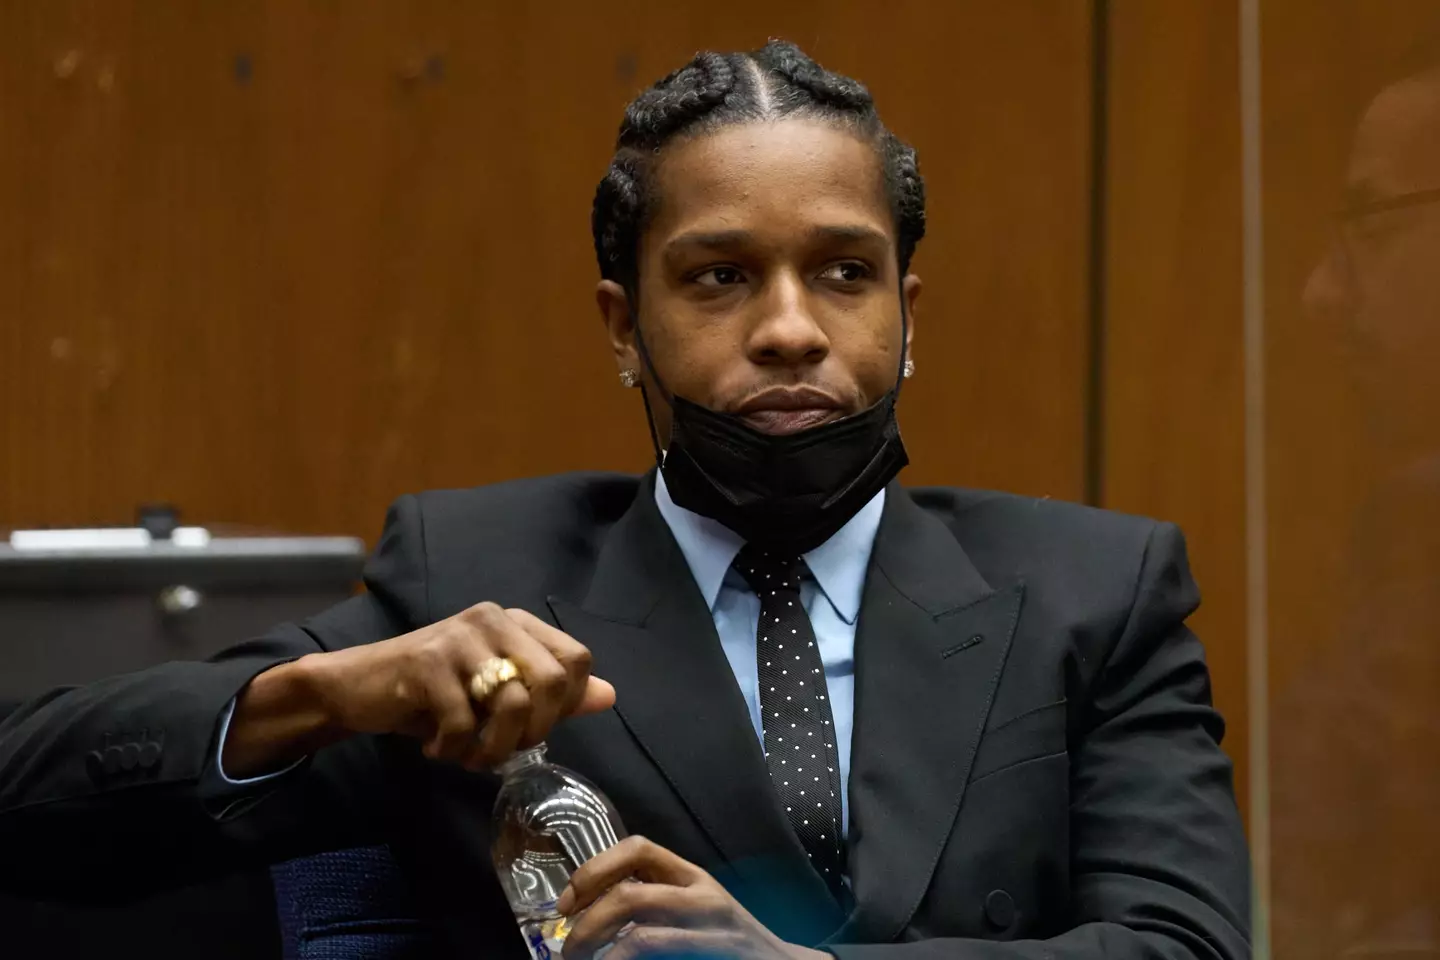 A$AP Rocky is now facing criminal charges following a preliminary hearing.